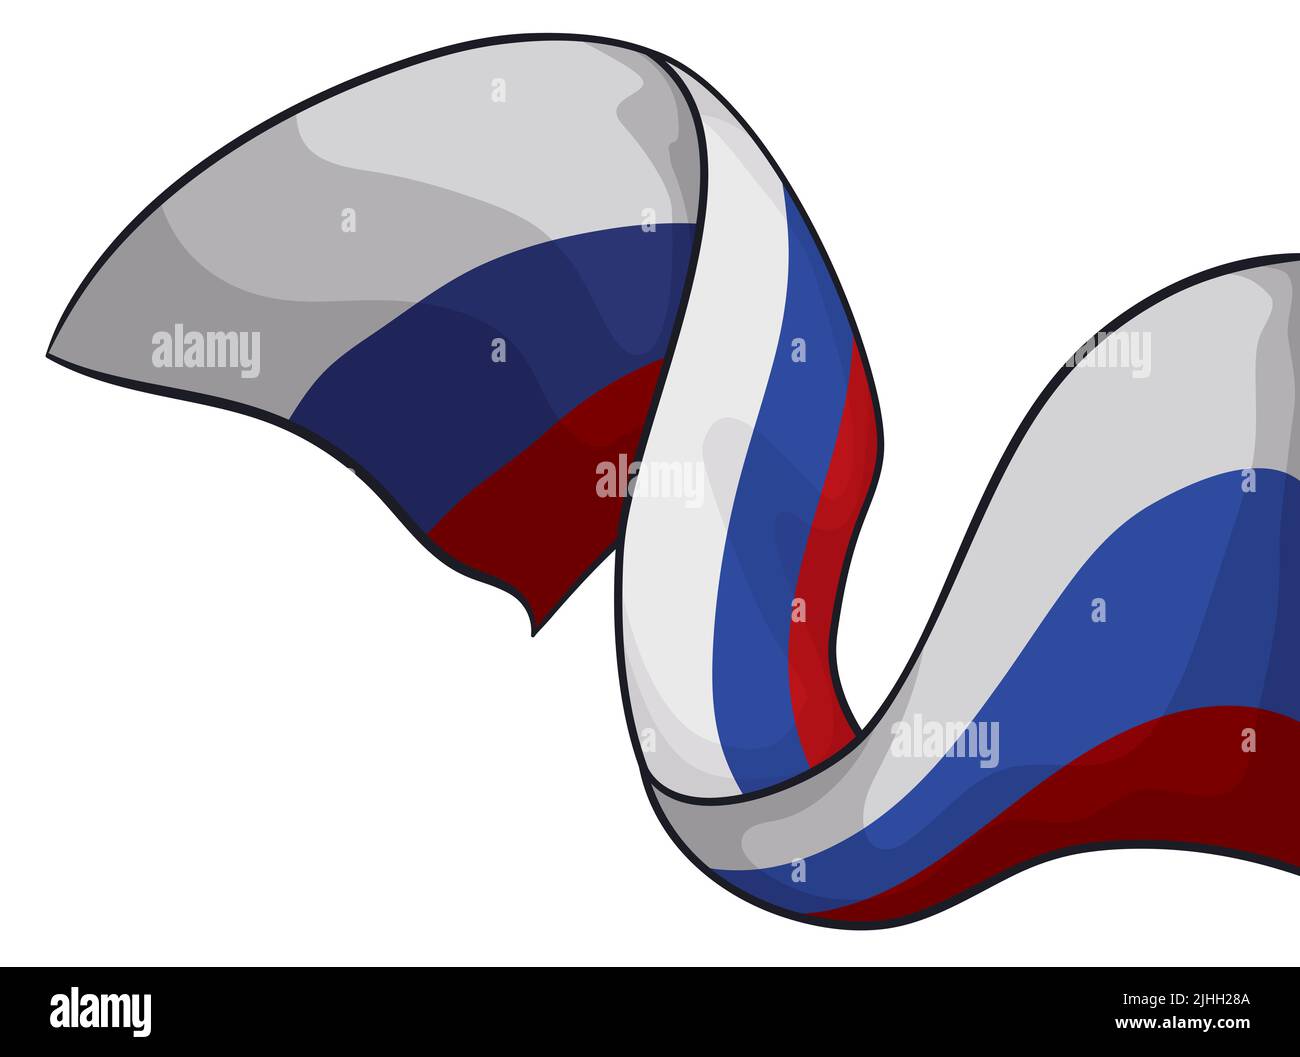 View of tricolor ribbon with the Russia flag colors: white, blue and red Stock Vector